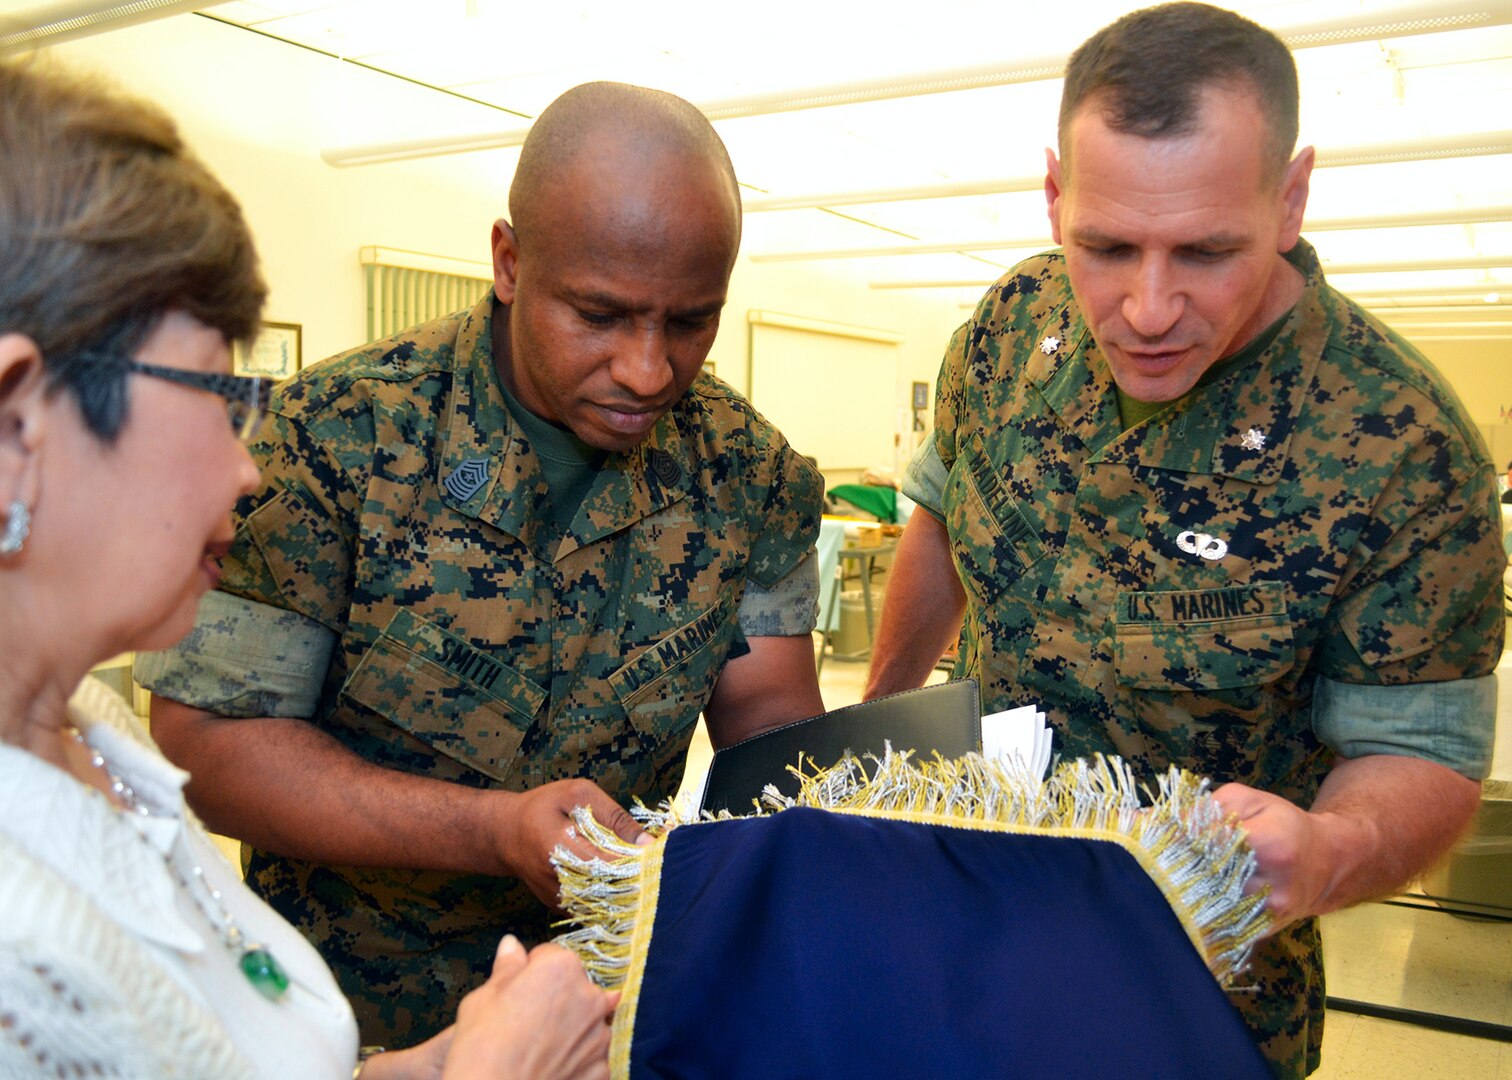 Marine Sgt. Maj. Gary Smith, Marine Corps Systems Command senior enlisted Marine, and Marine Lt. Col. Christopher Madeline, product manager for Reconnaissance and Amphibious Raids, inspect the threads of a flag in the DLA Troop Support flag room April 5, presented by Hue Nguyen, flag room supervisor.